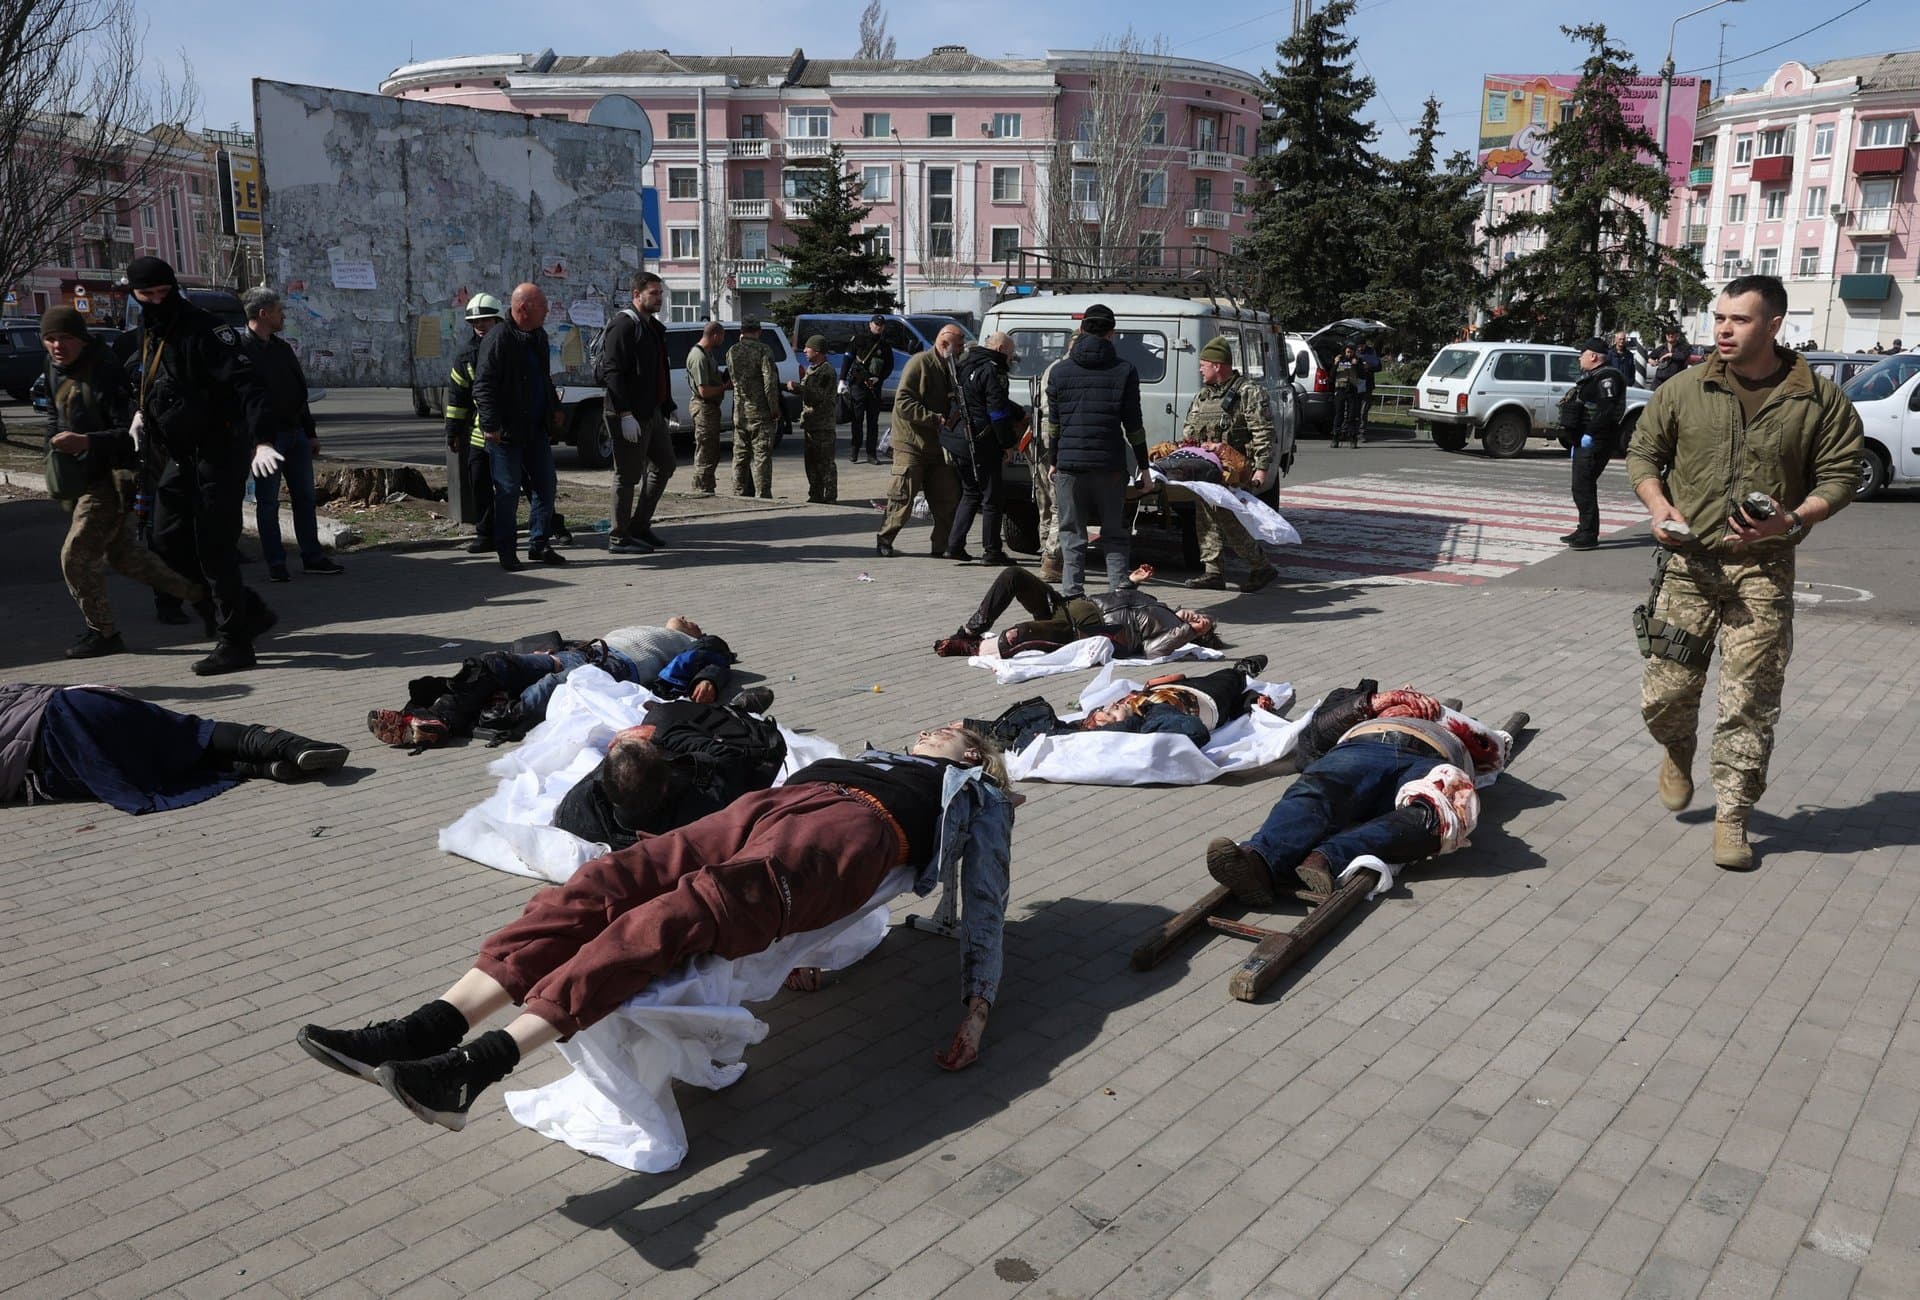 Ukrainian servicemen and emergency personnel tend to victims in the aftermath of a rocket attack on the railway station in Kramatorsk